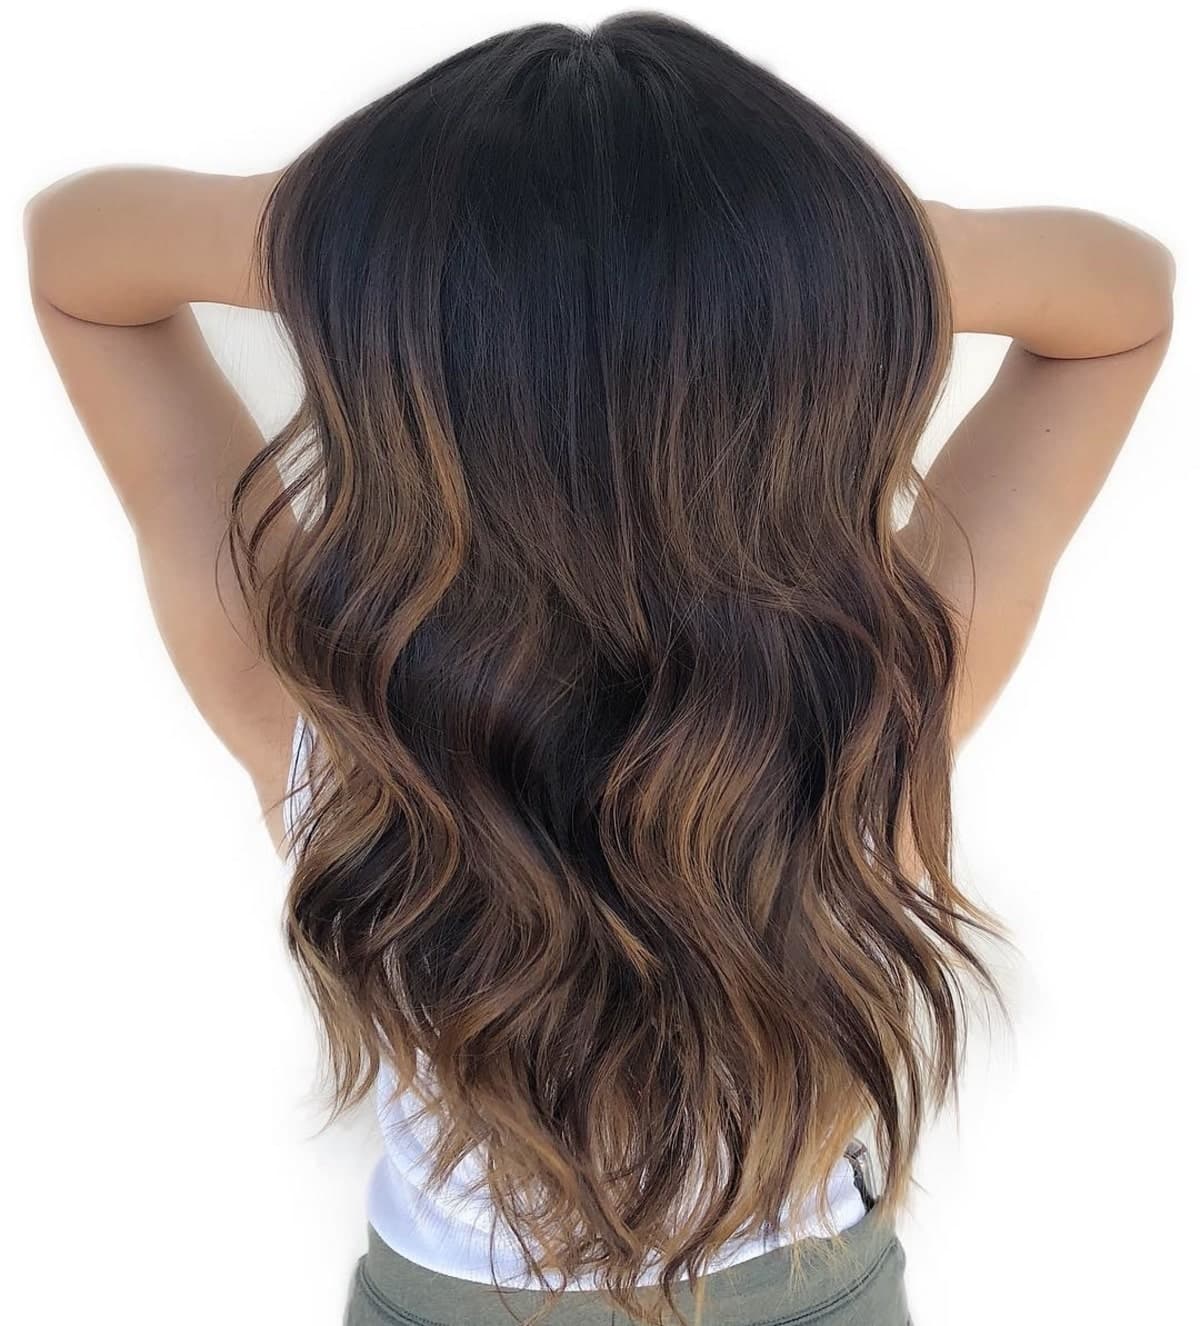 Yummy honey brown highlights on long wavy hairstyle